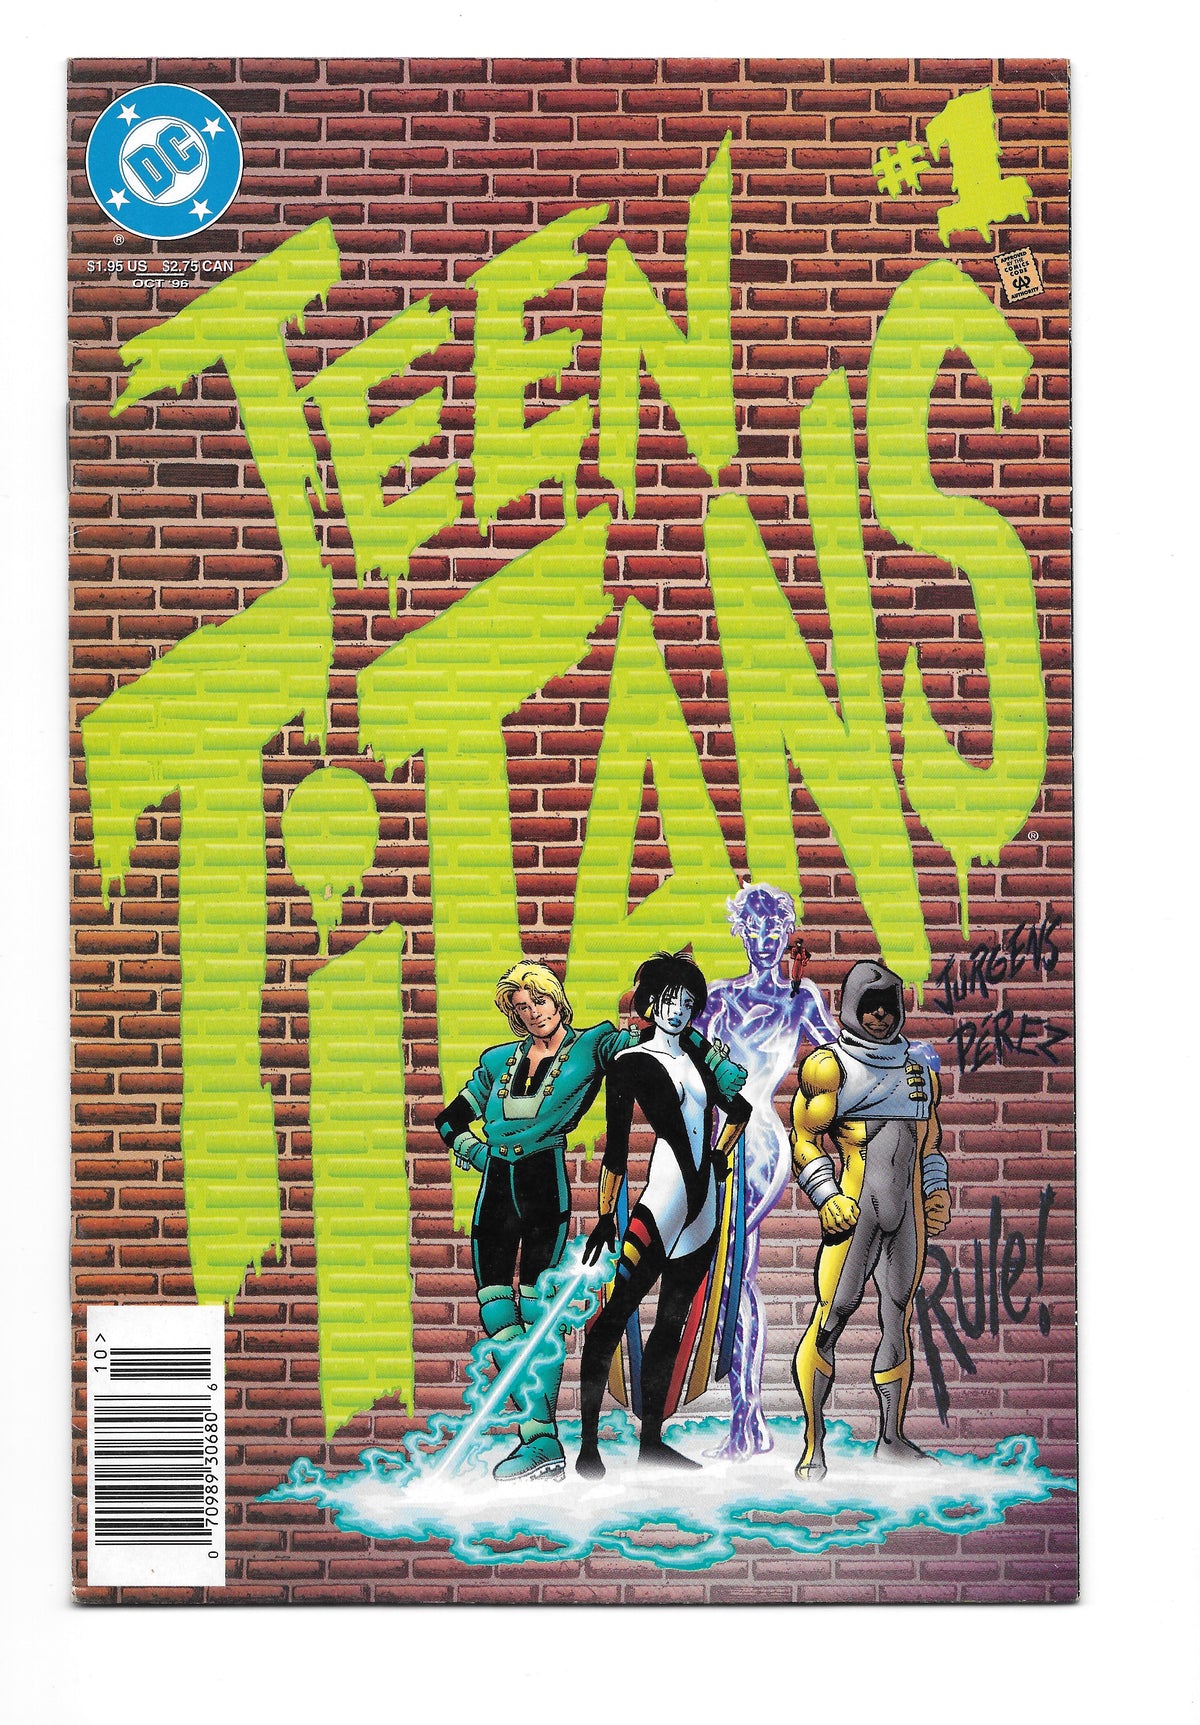 Photo of Teen Titans, Vol. 2 (1996)  Iss 1 Very Fine/Near Mint  Comic sold by Stronghold Collectibles